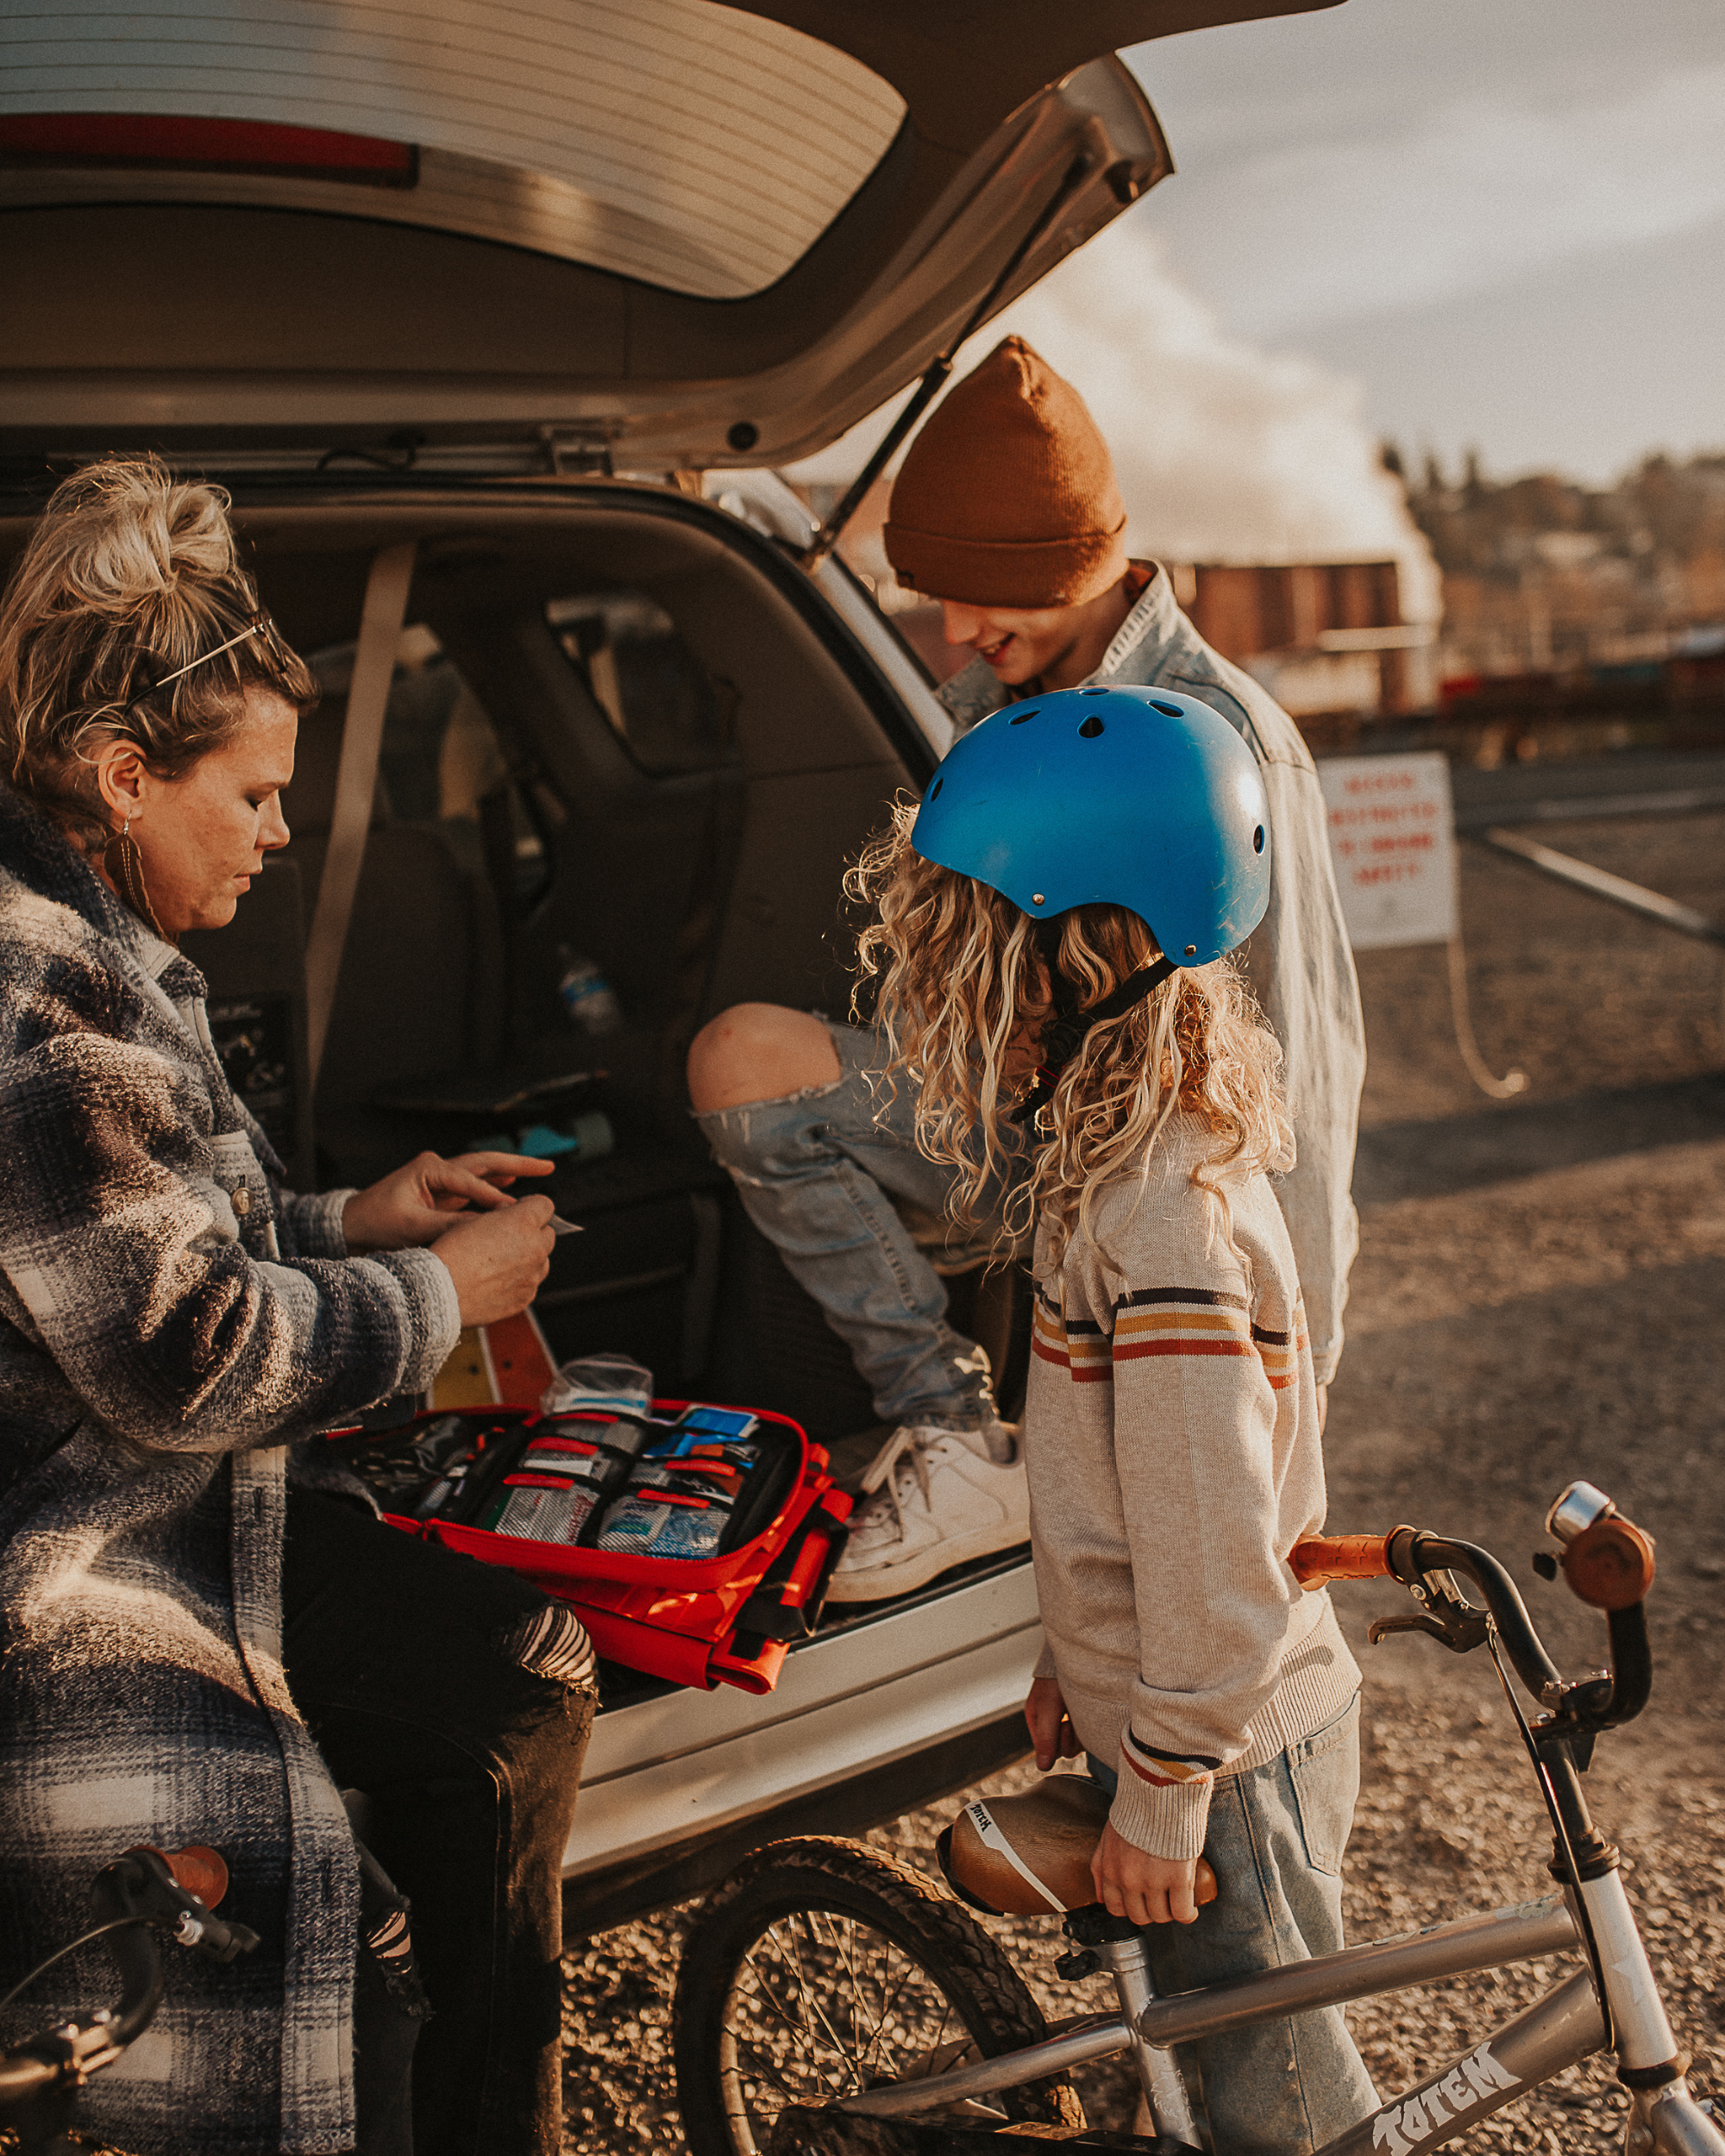 A mother opens the Roadie first aid kit in the trunk of her car at the park, as her two children wait patiently beside her.